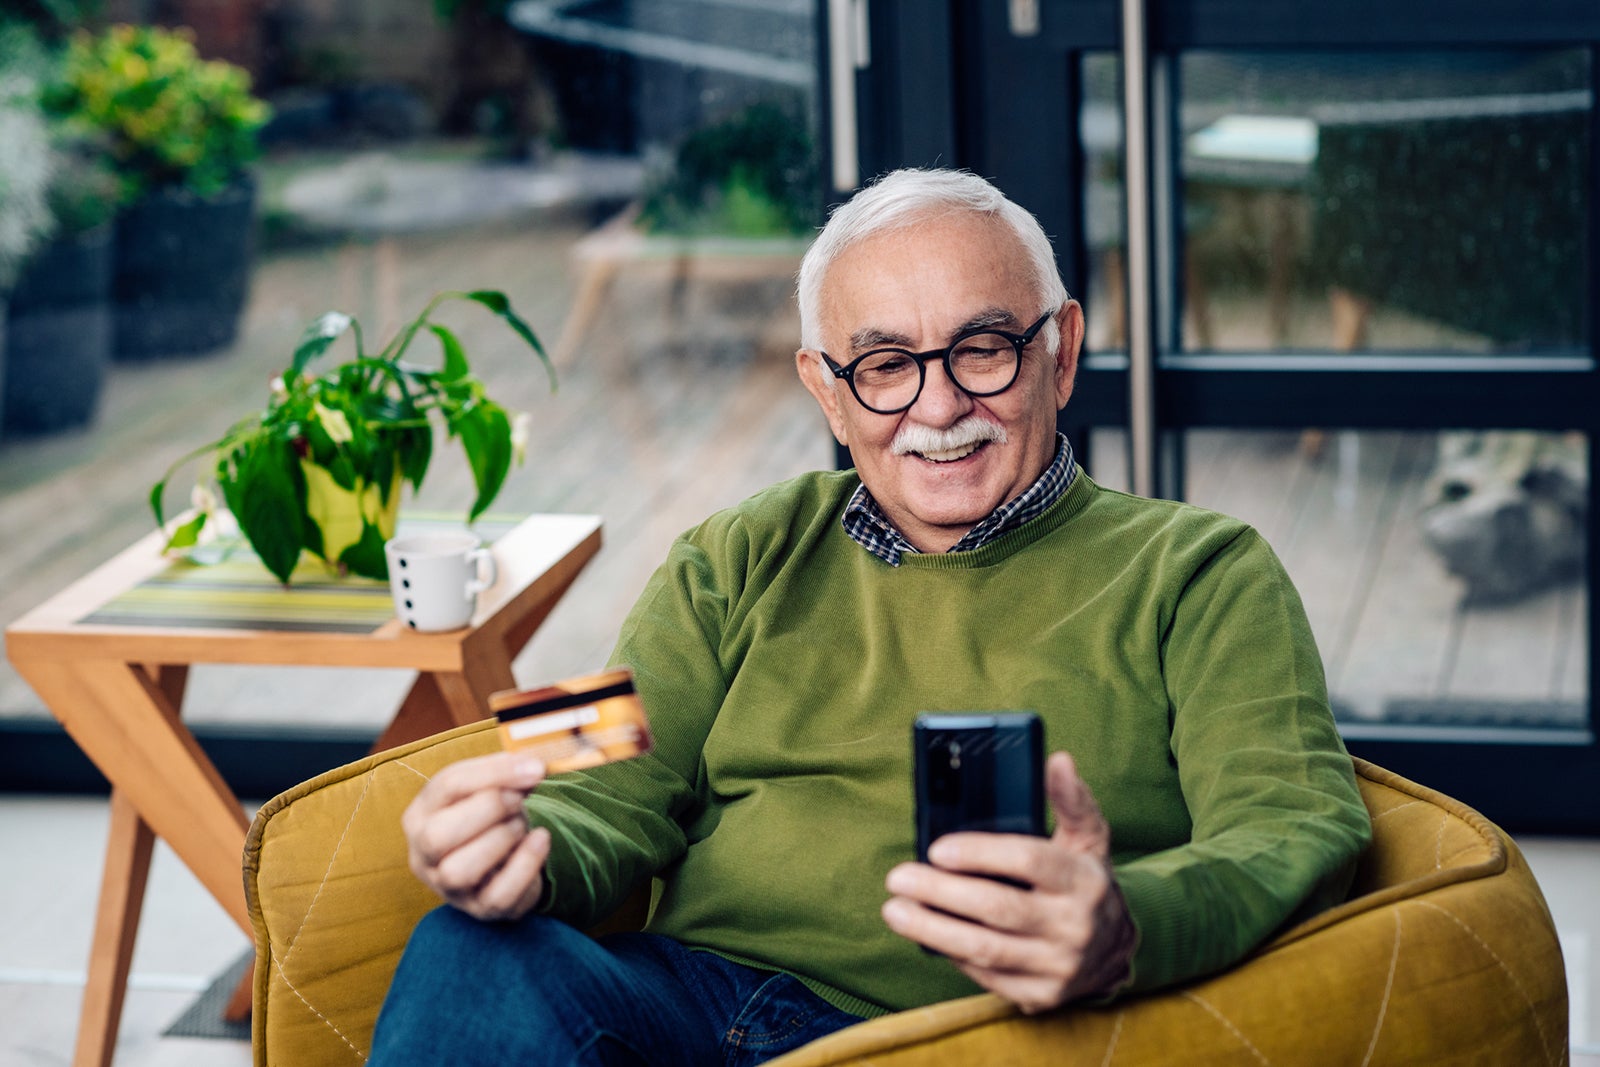 elderly man sitting in a chair holding a credit card and phone